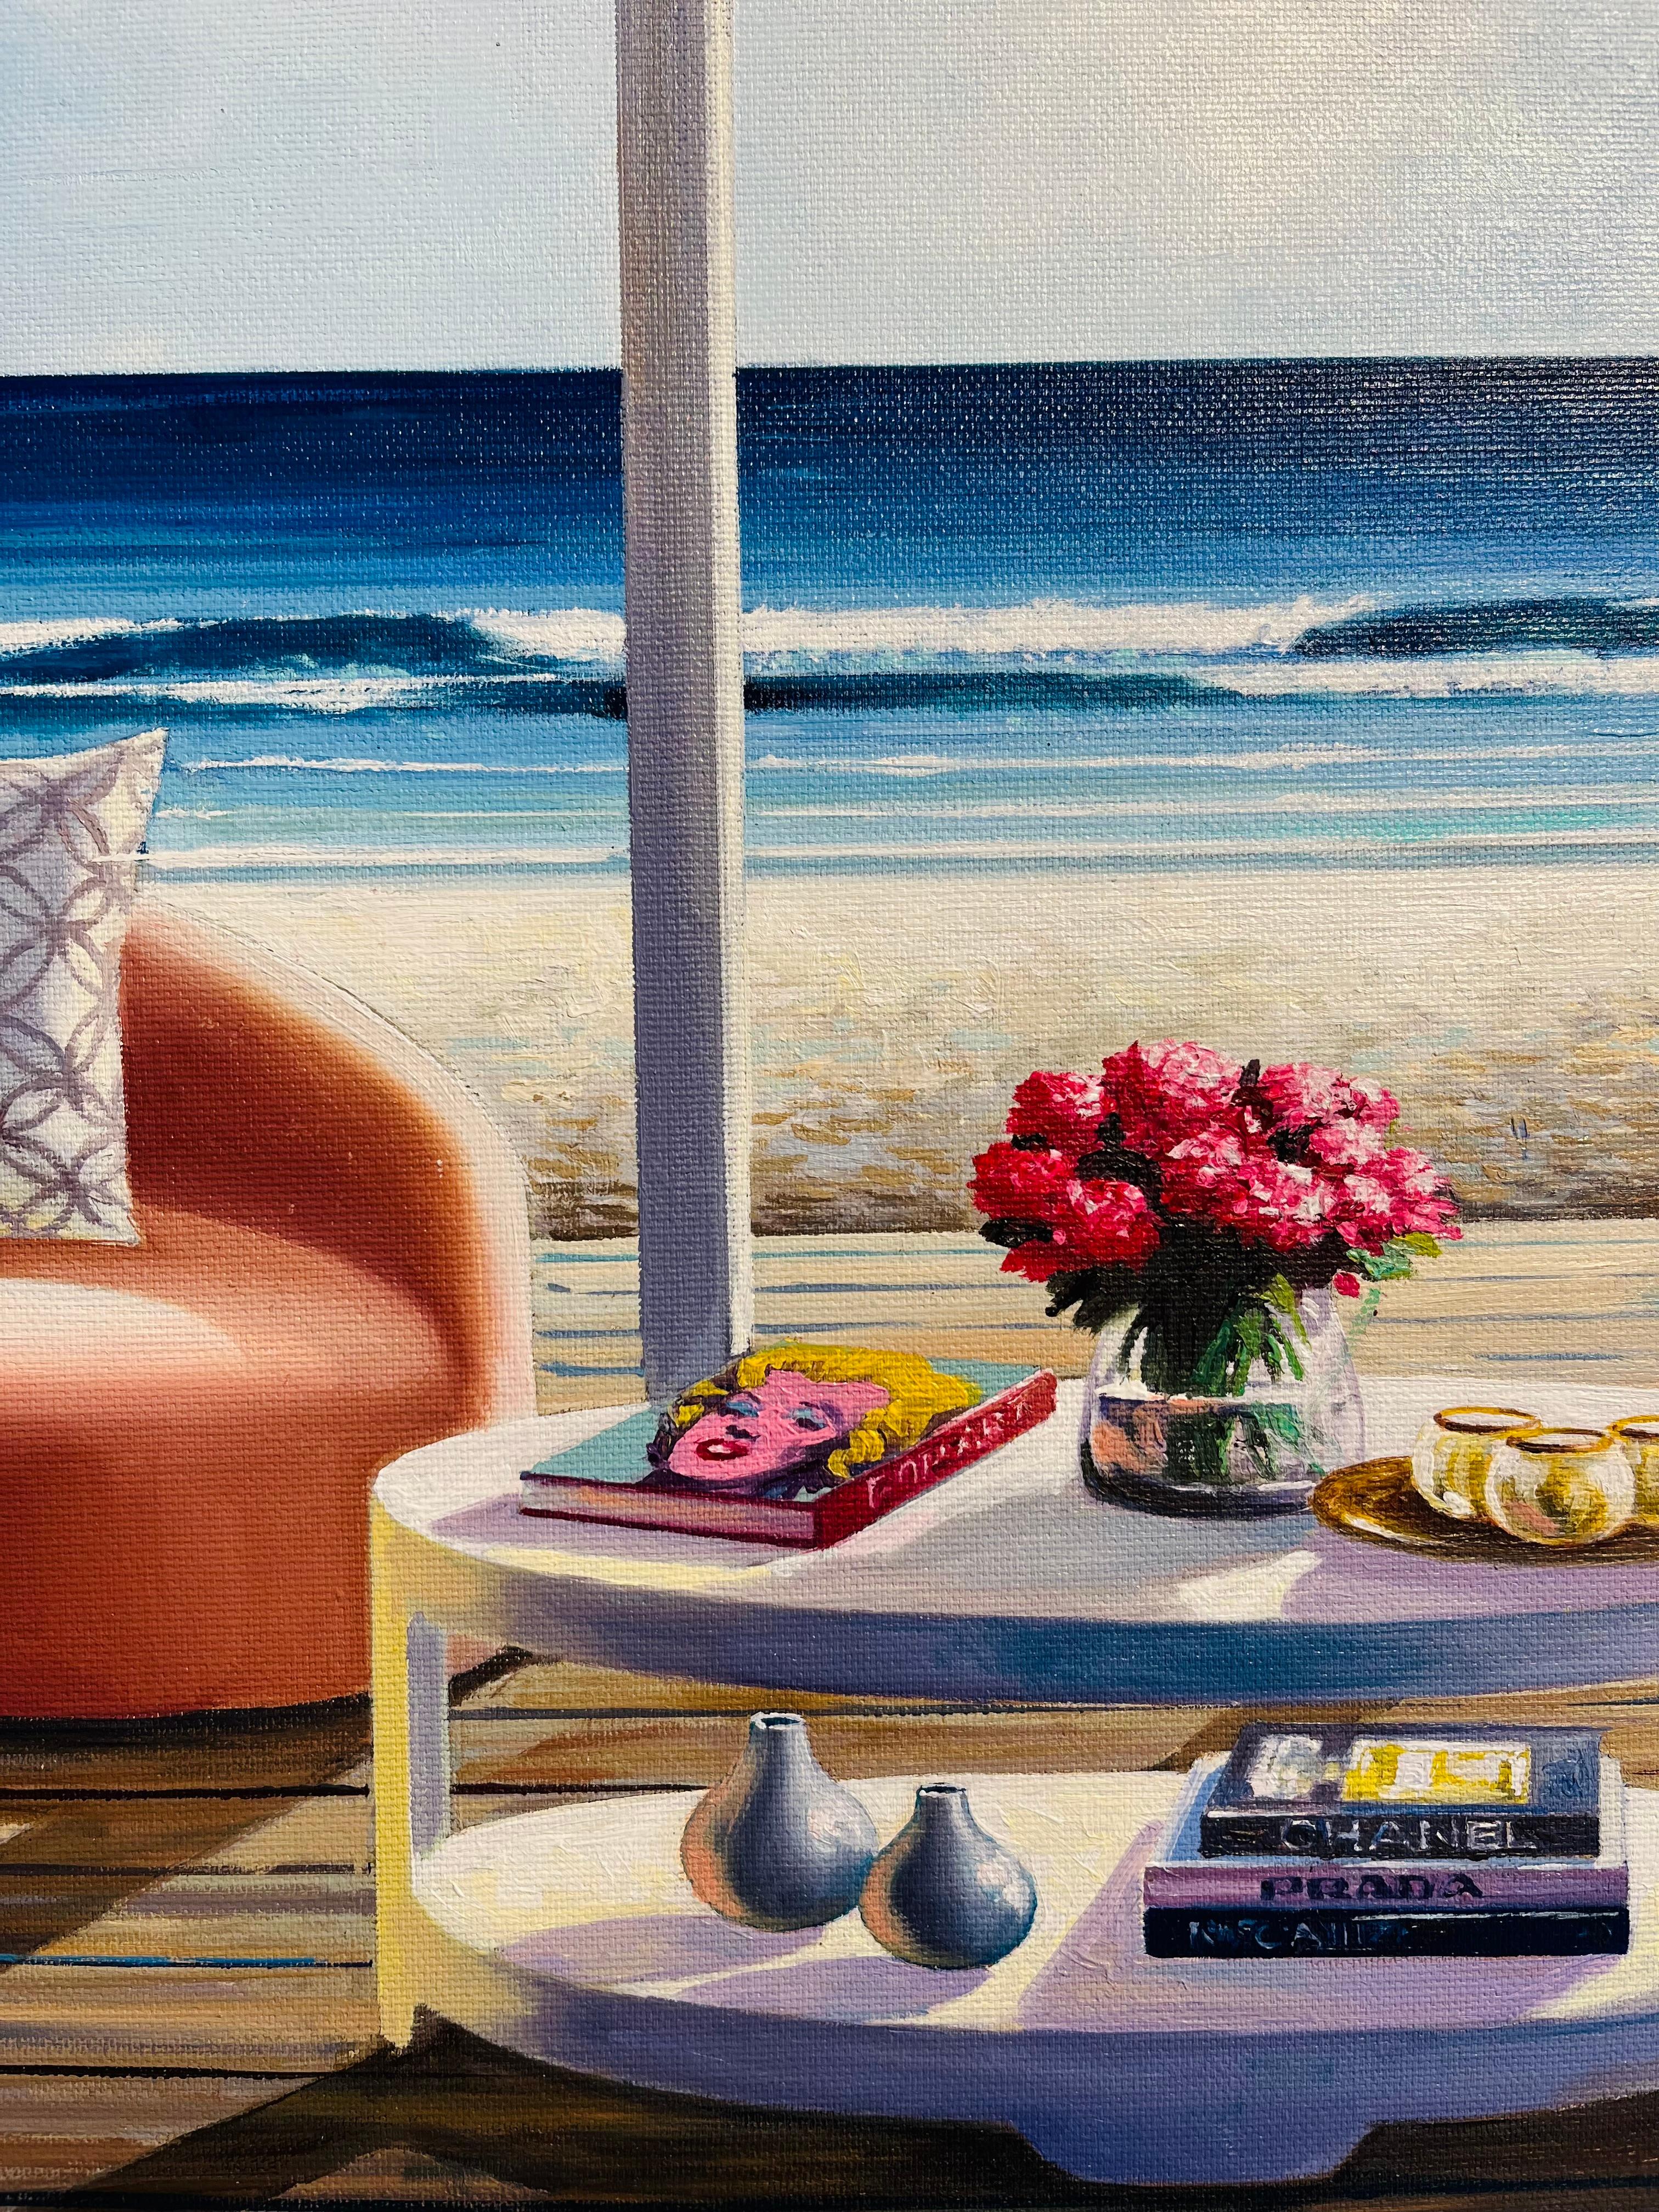 Books and Flowers-original surreal still life-interior-seascape oil painting-Art - Painting by Luis Fuentes